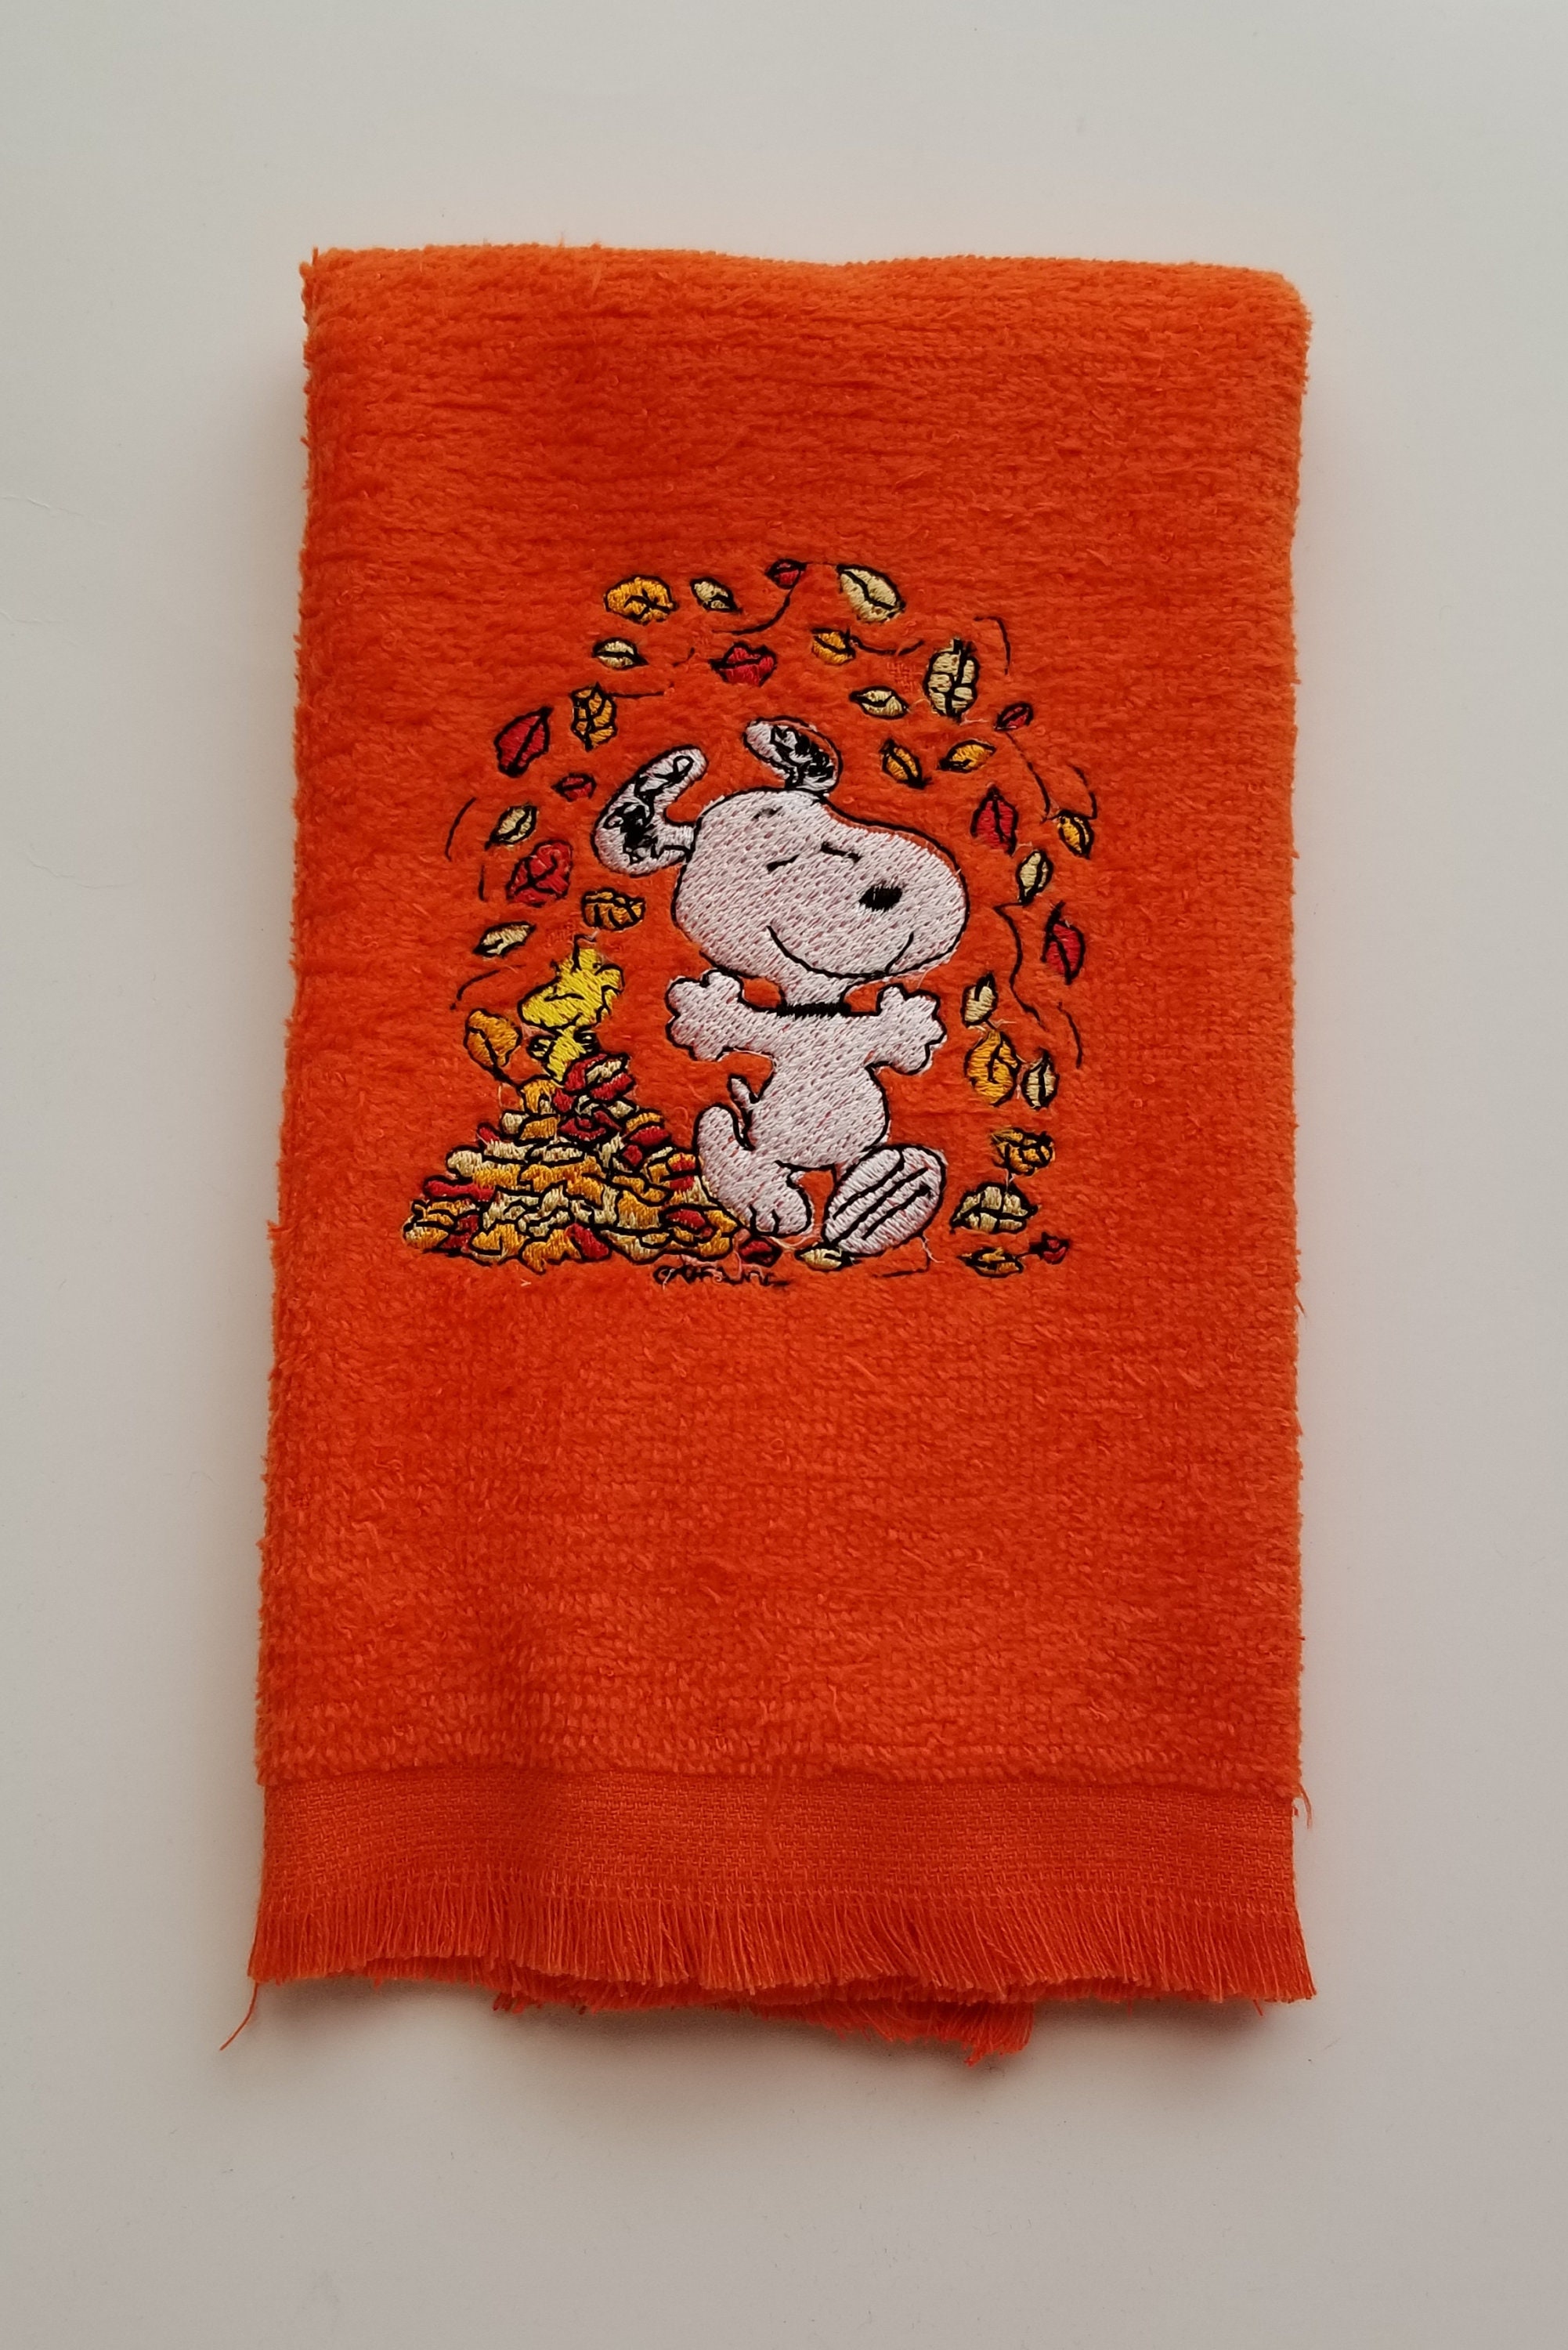 Happy Fall Fun/Autumn Leaves Finger Tip Towel OR Hand Towel | Etsy